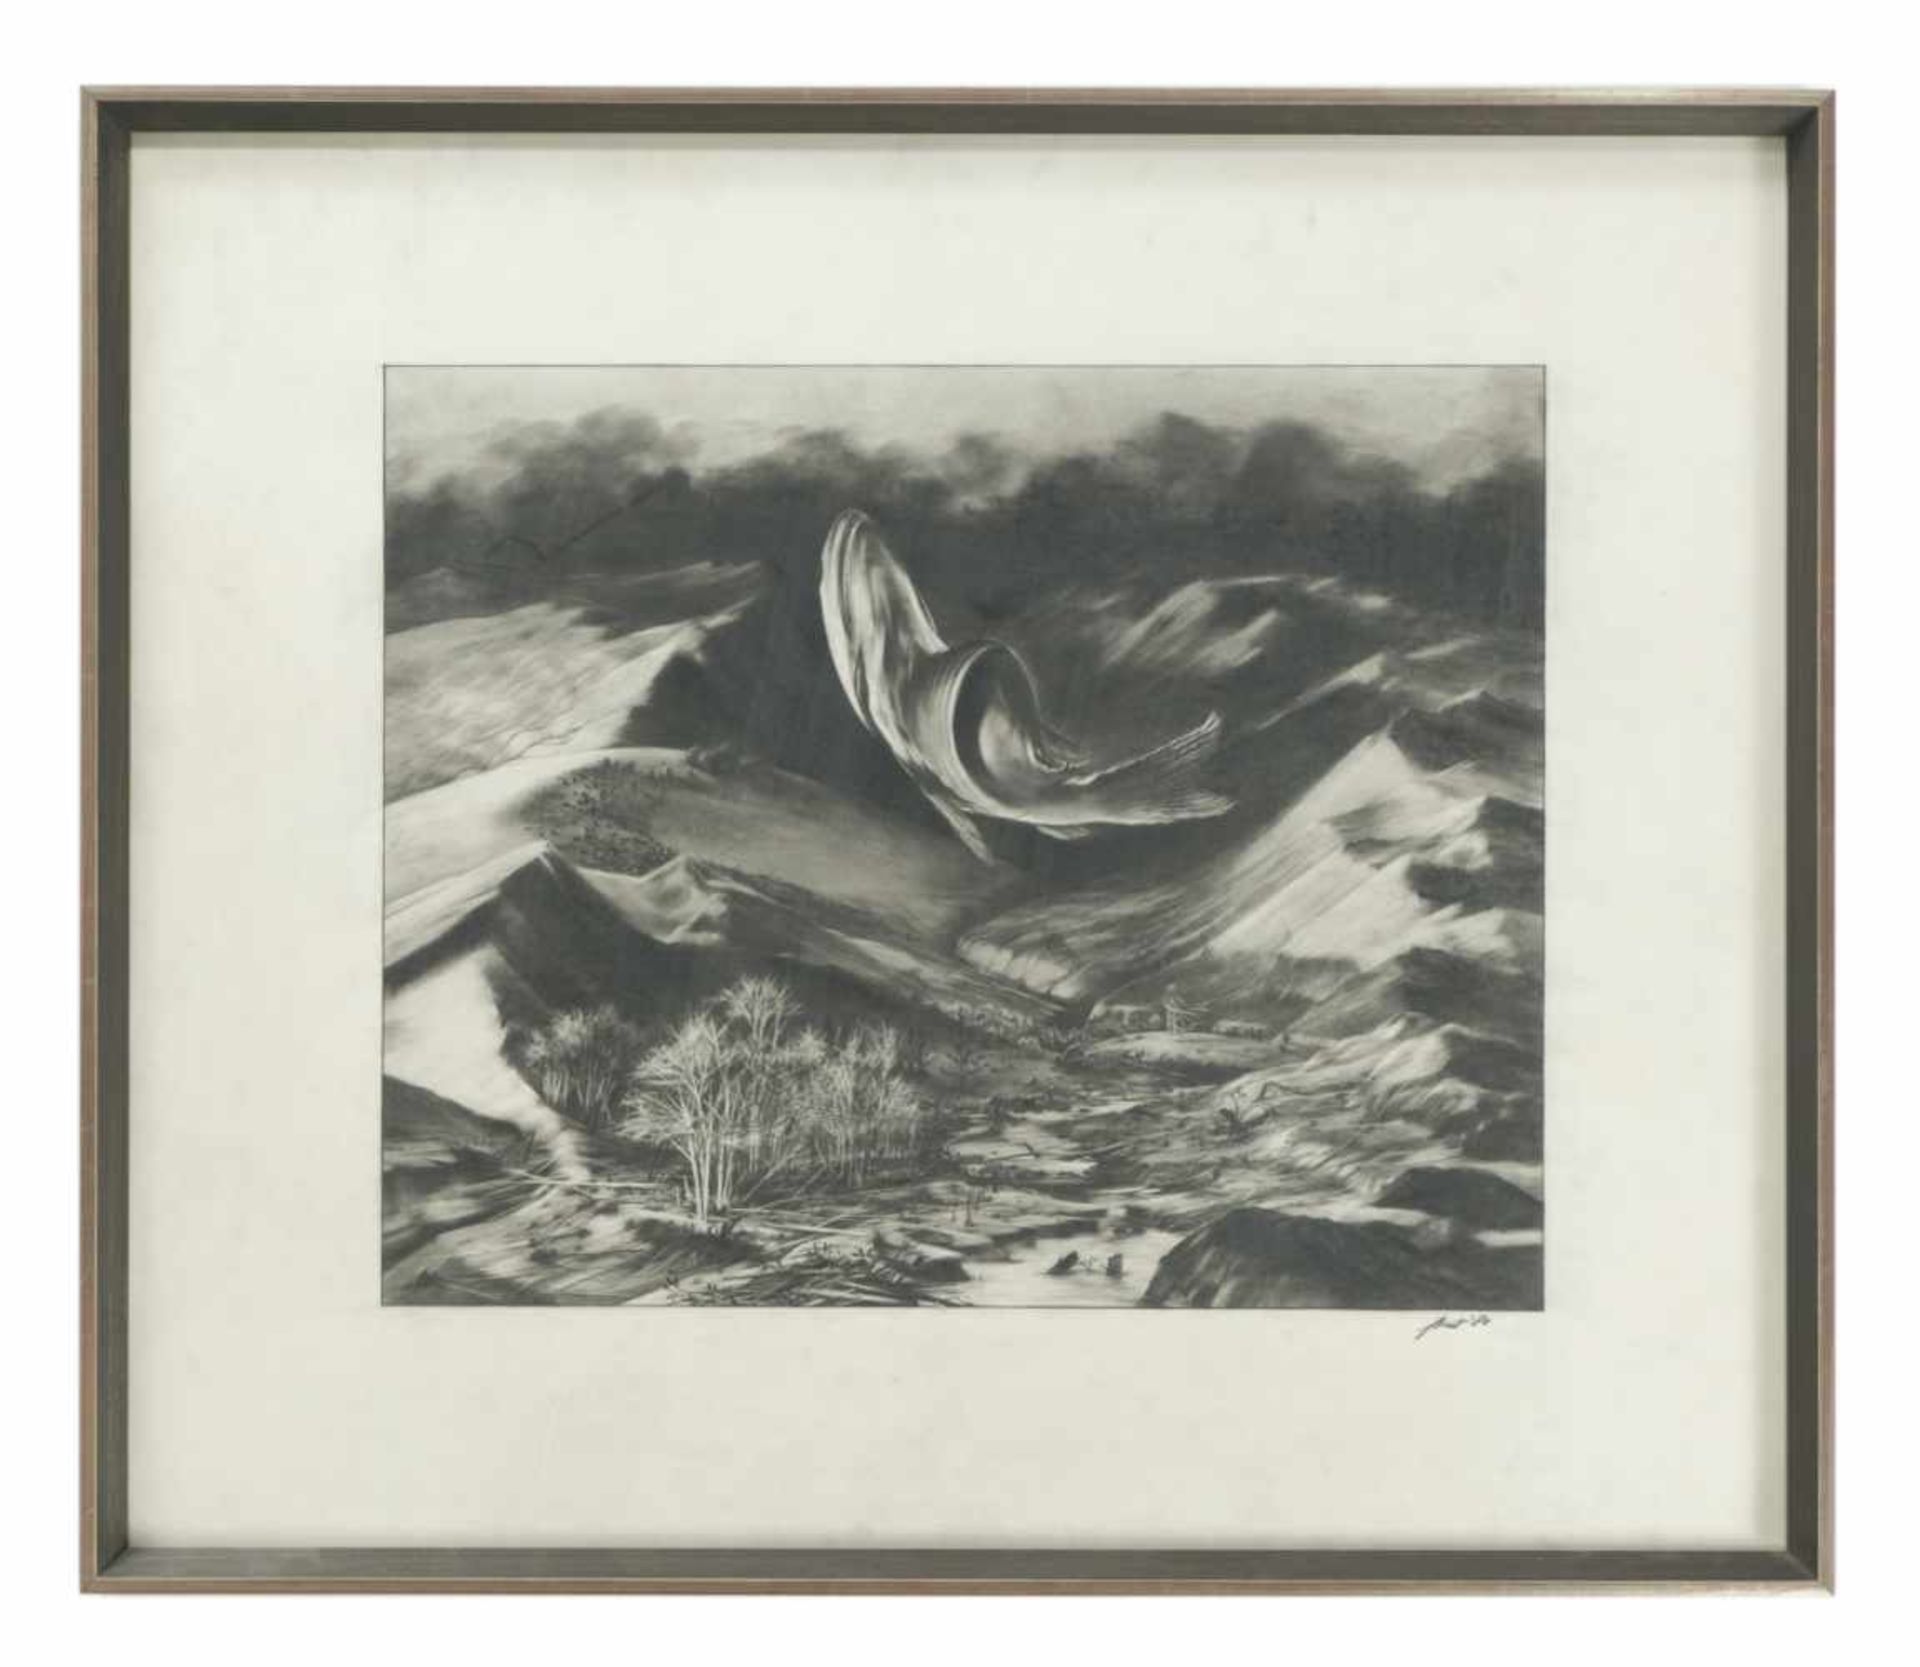 The Underground-Artist Jan Faust, Untitled, Pencil-Drawing, signed and dated (19)80, 33 x - Image 2 of 2